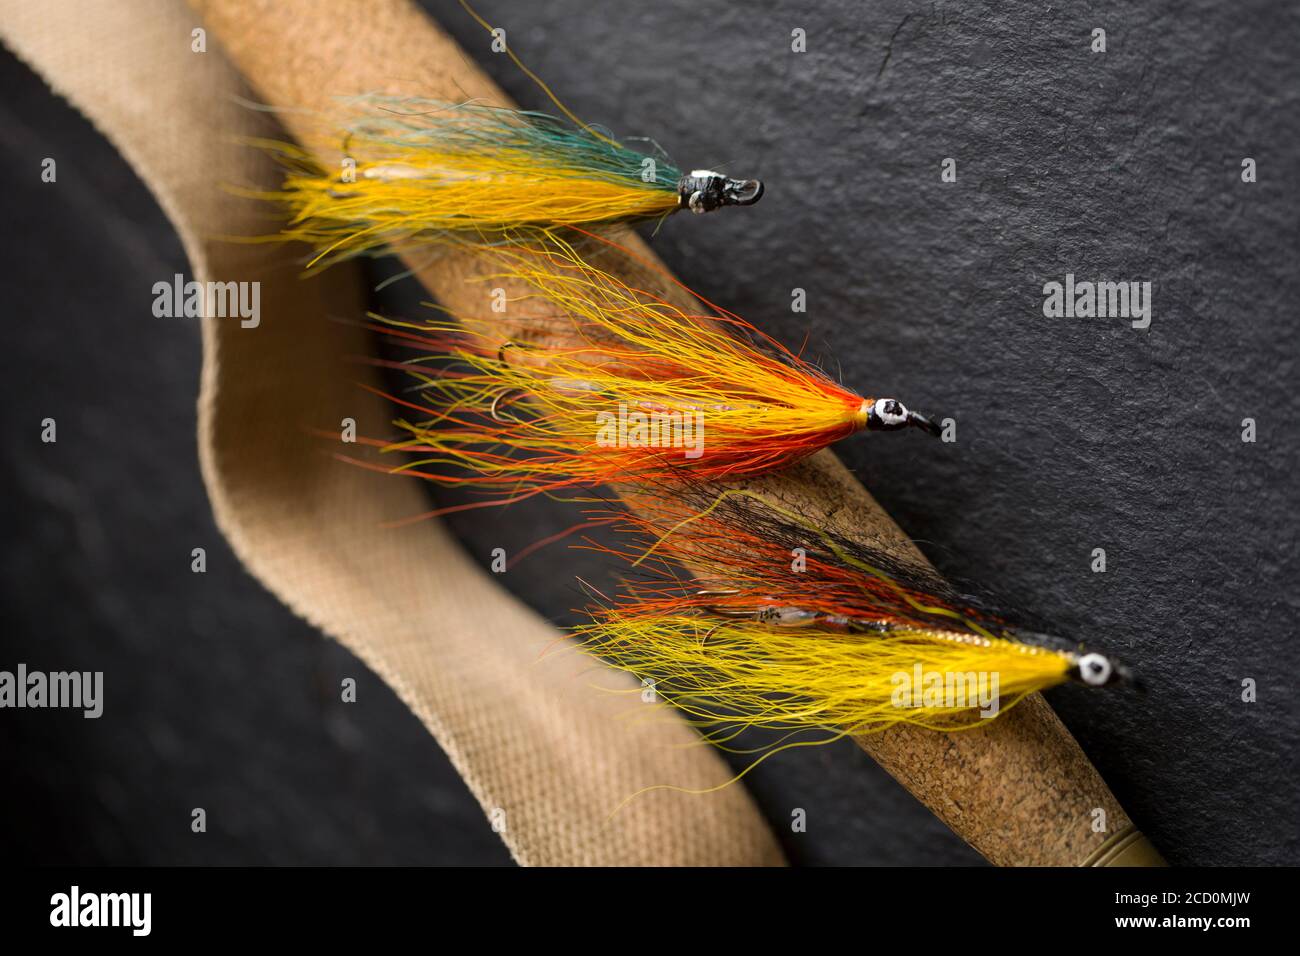 Three salmon flies that were probably homemade on the cork handle